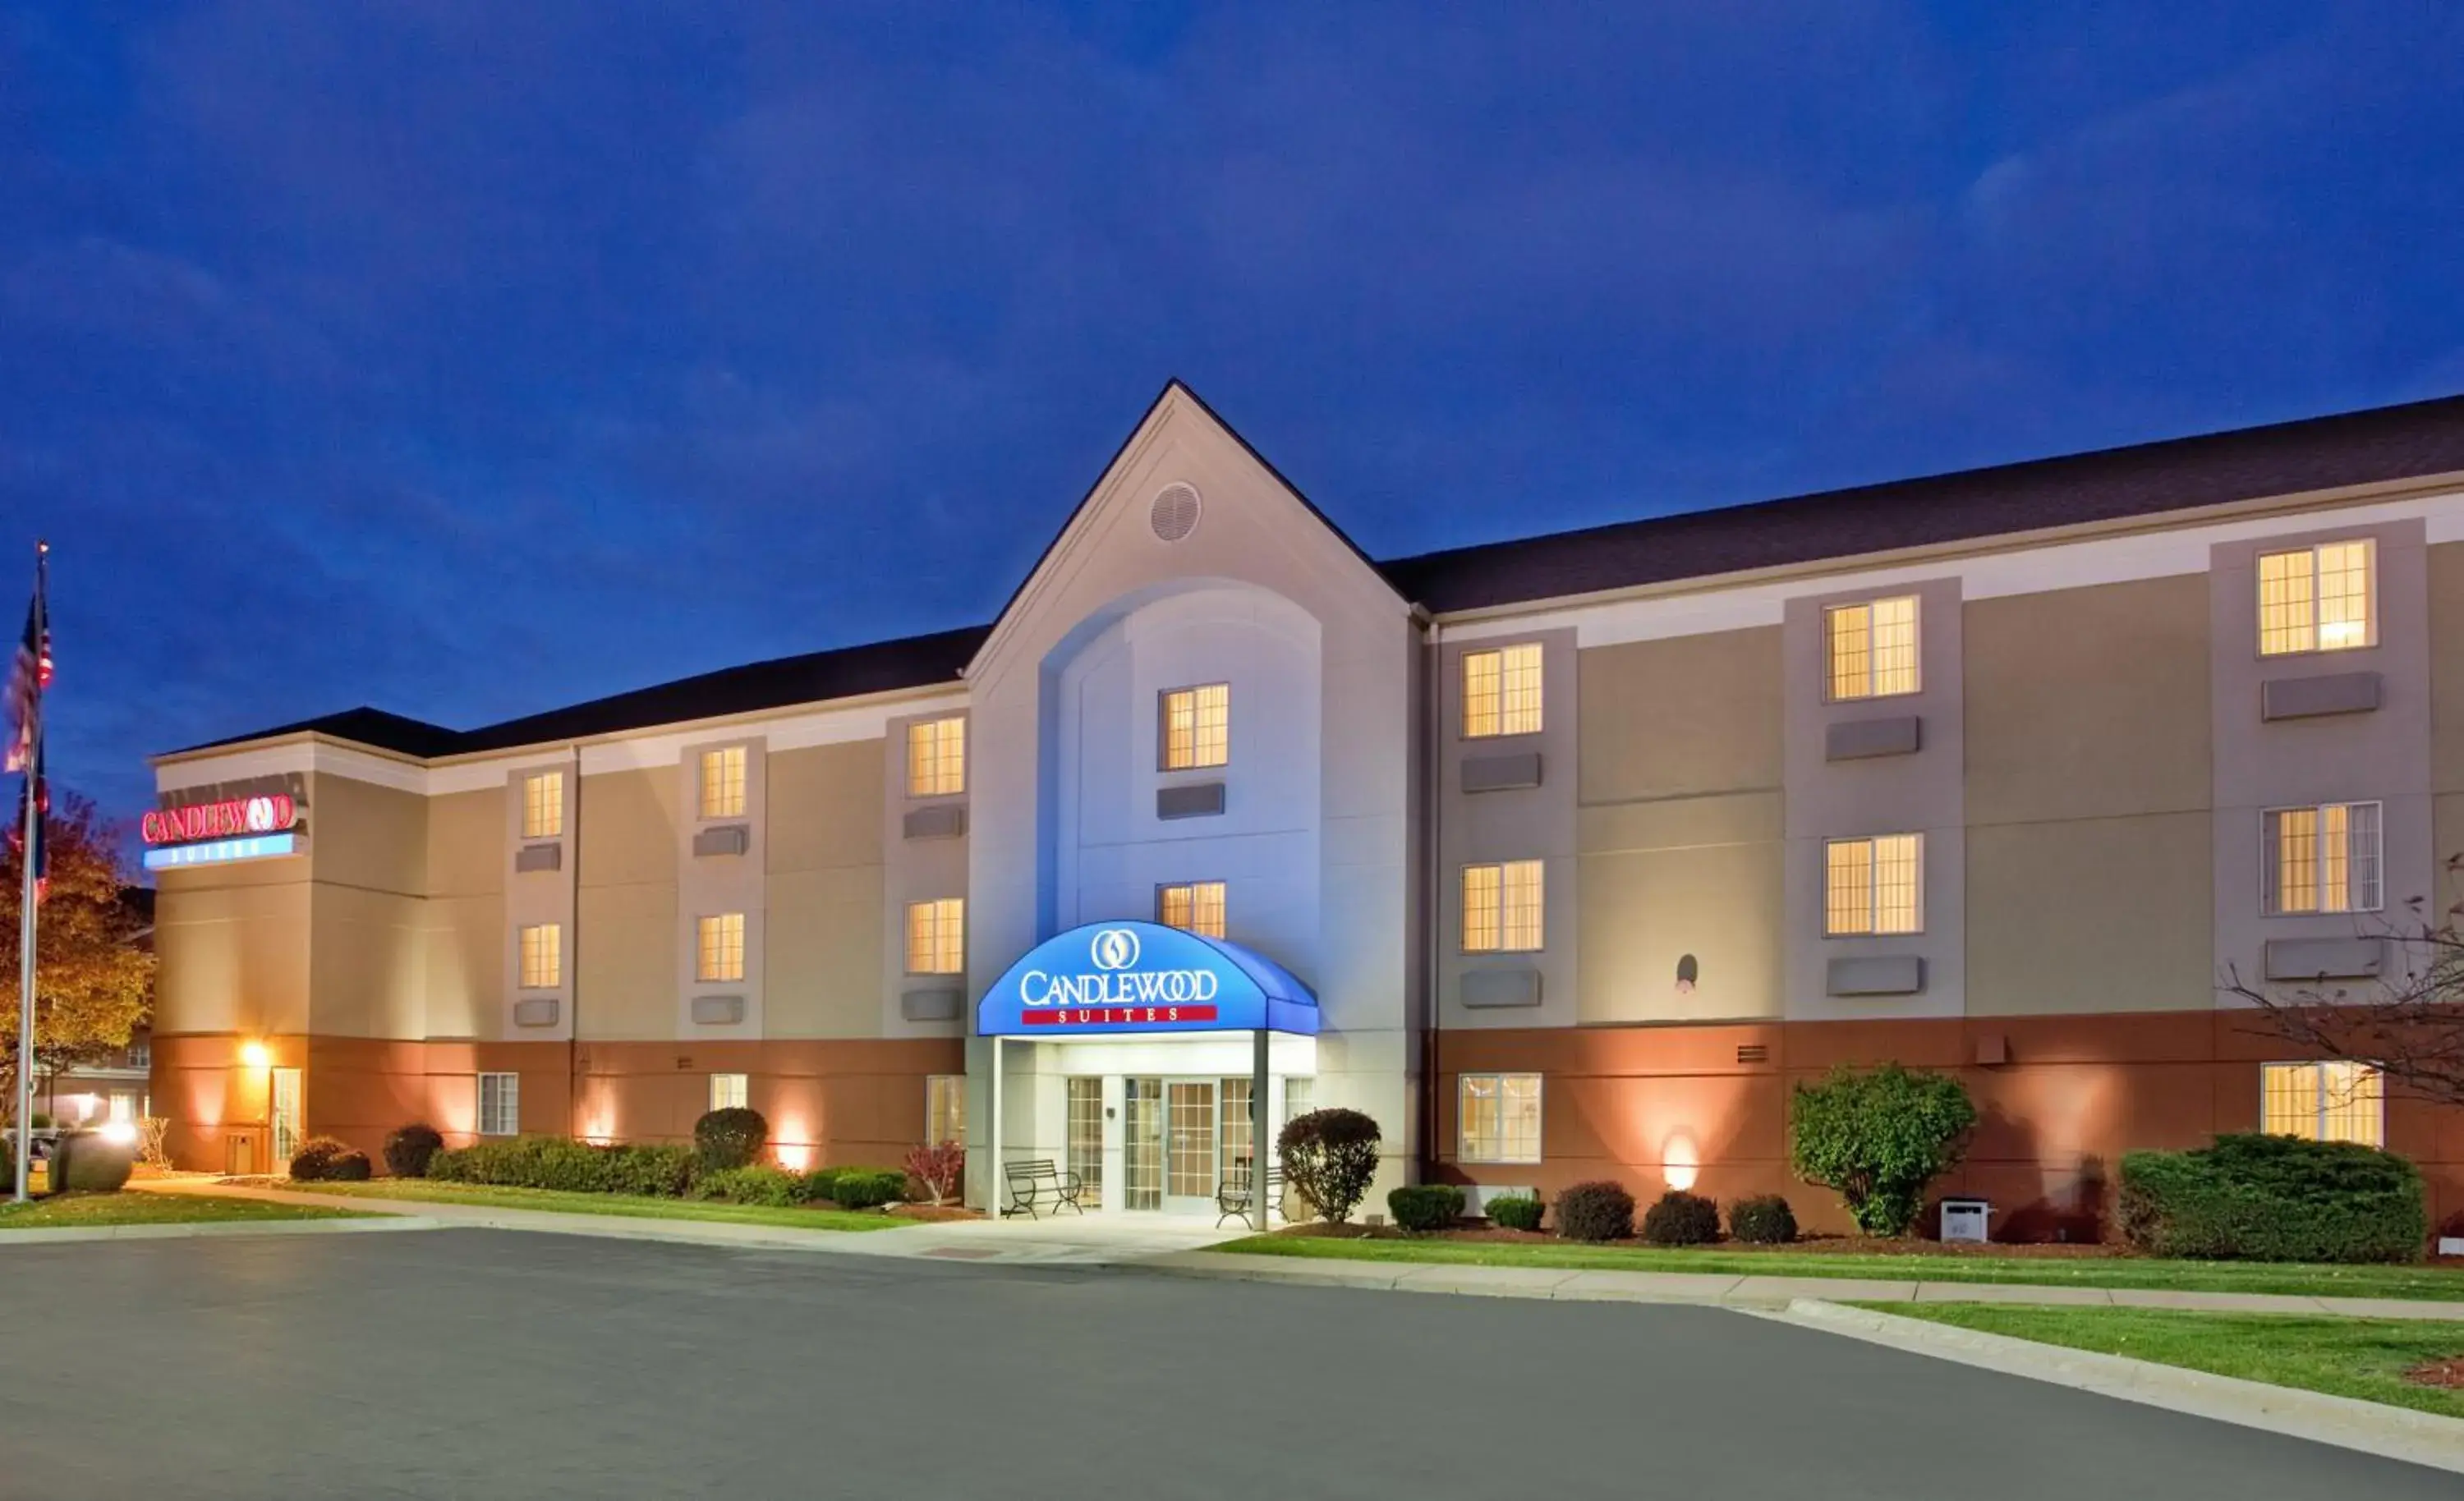 Property building in Candlewood Suites Rockford, an IHG Hotel